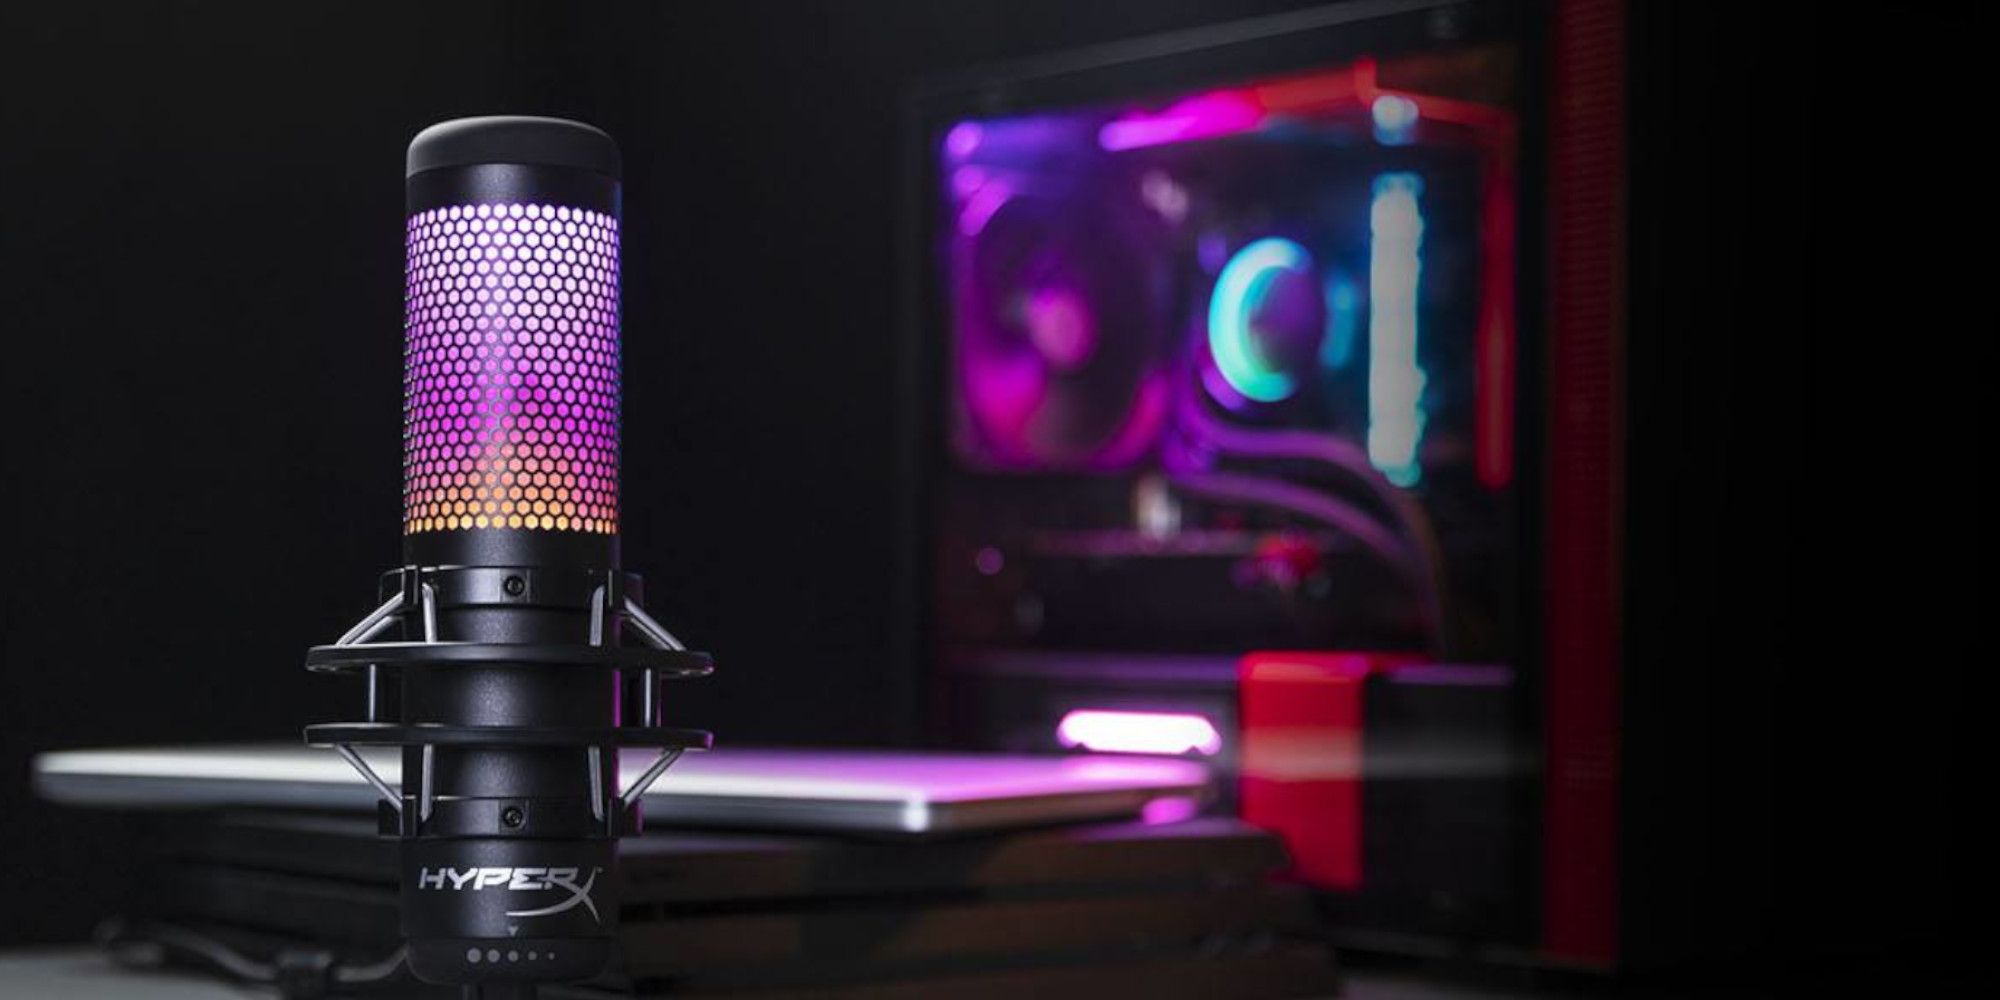 HyperX Releases the QuadCast S USB Microphone With Customizable RGB Lighting